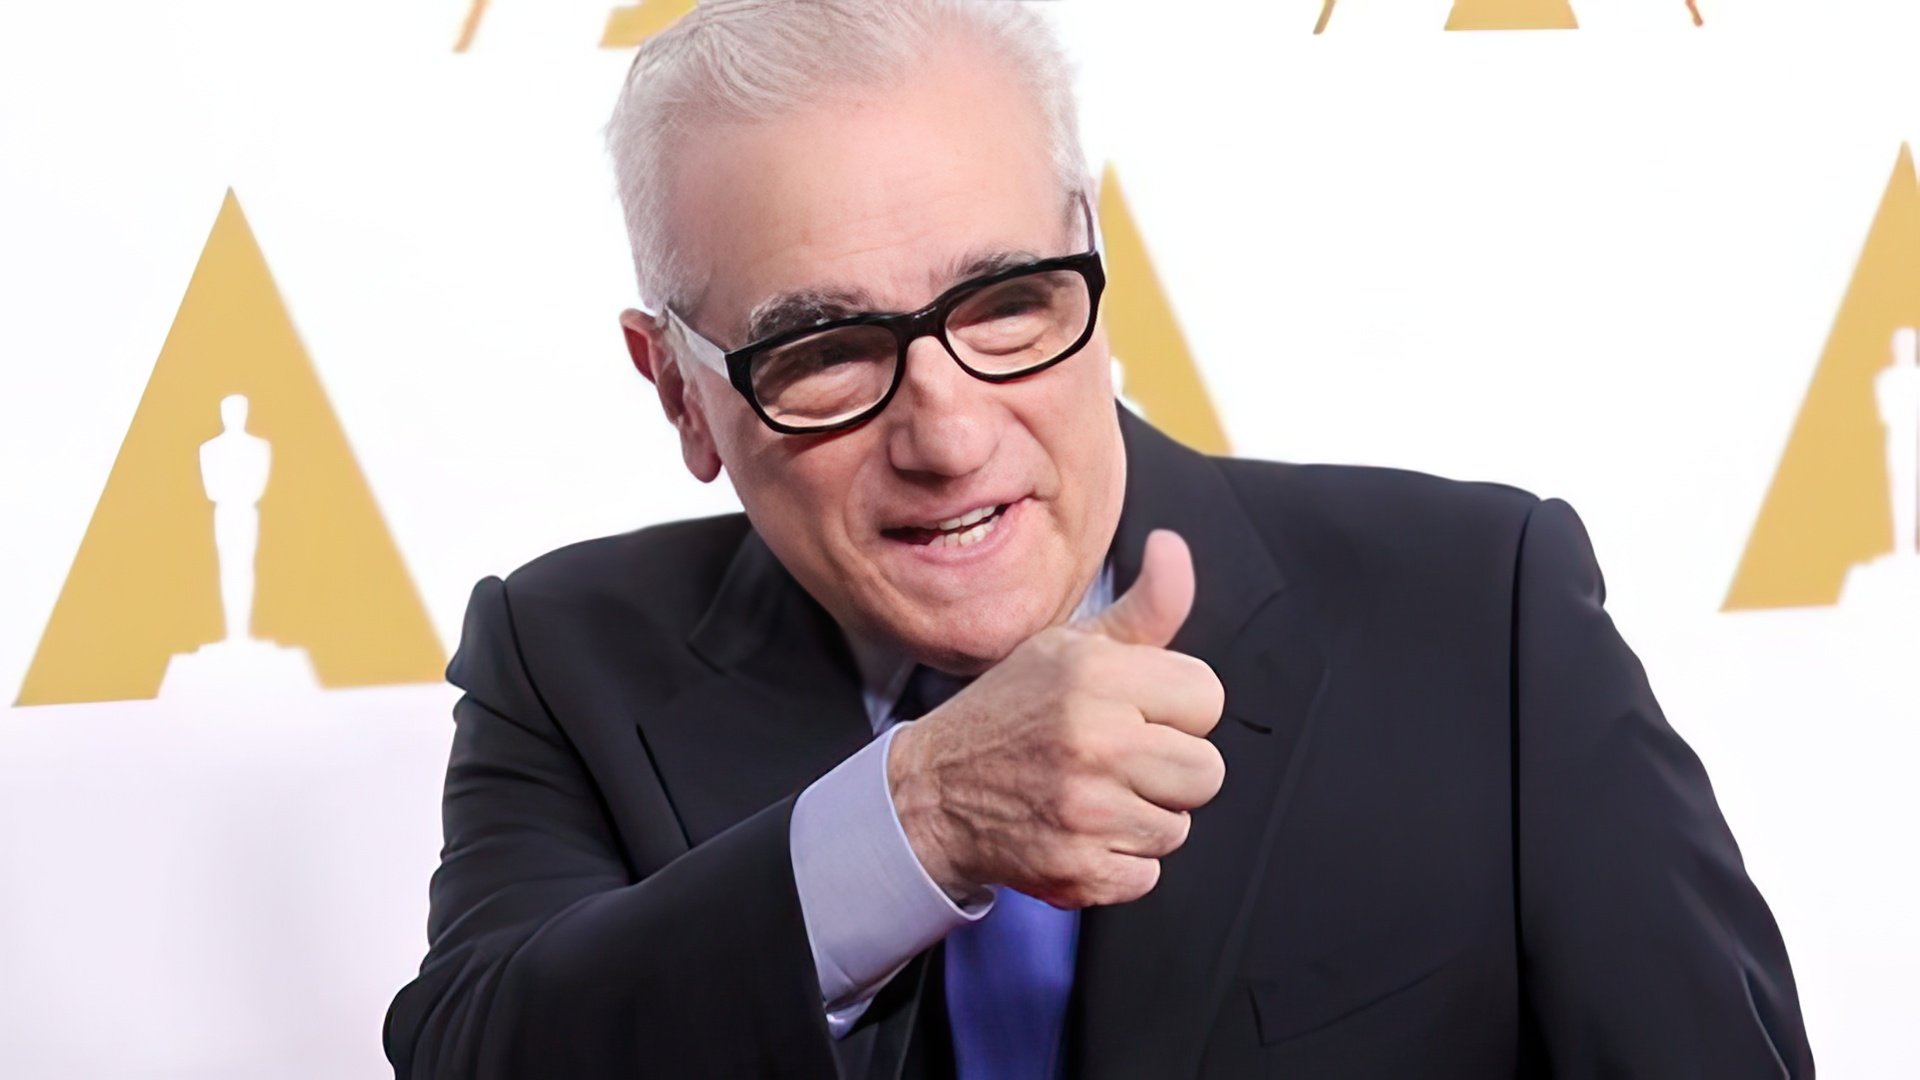 Scorsese's personal life was eventful